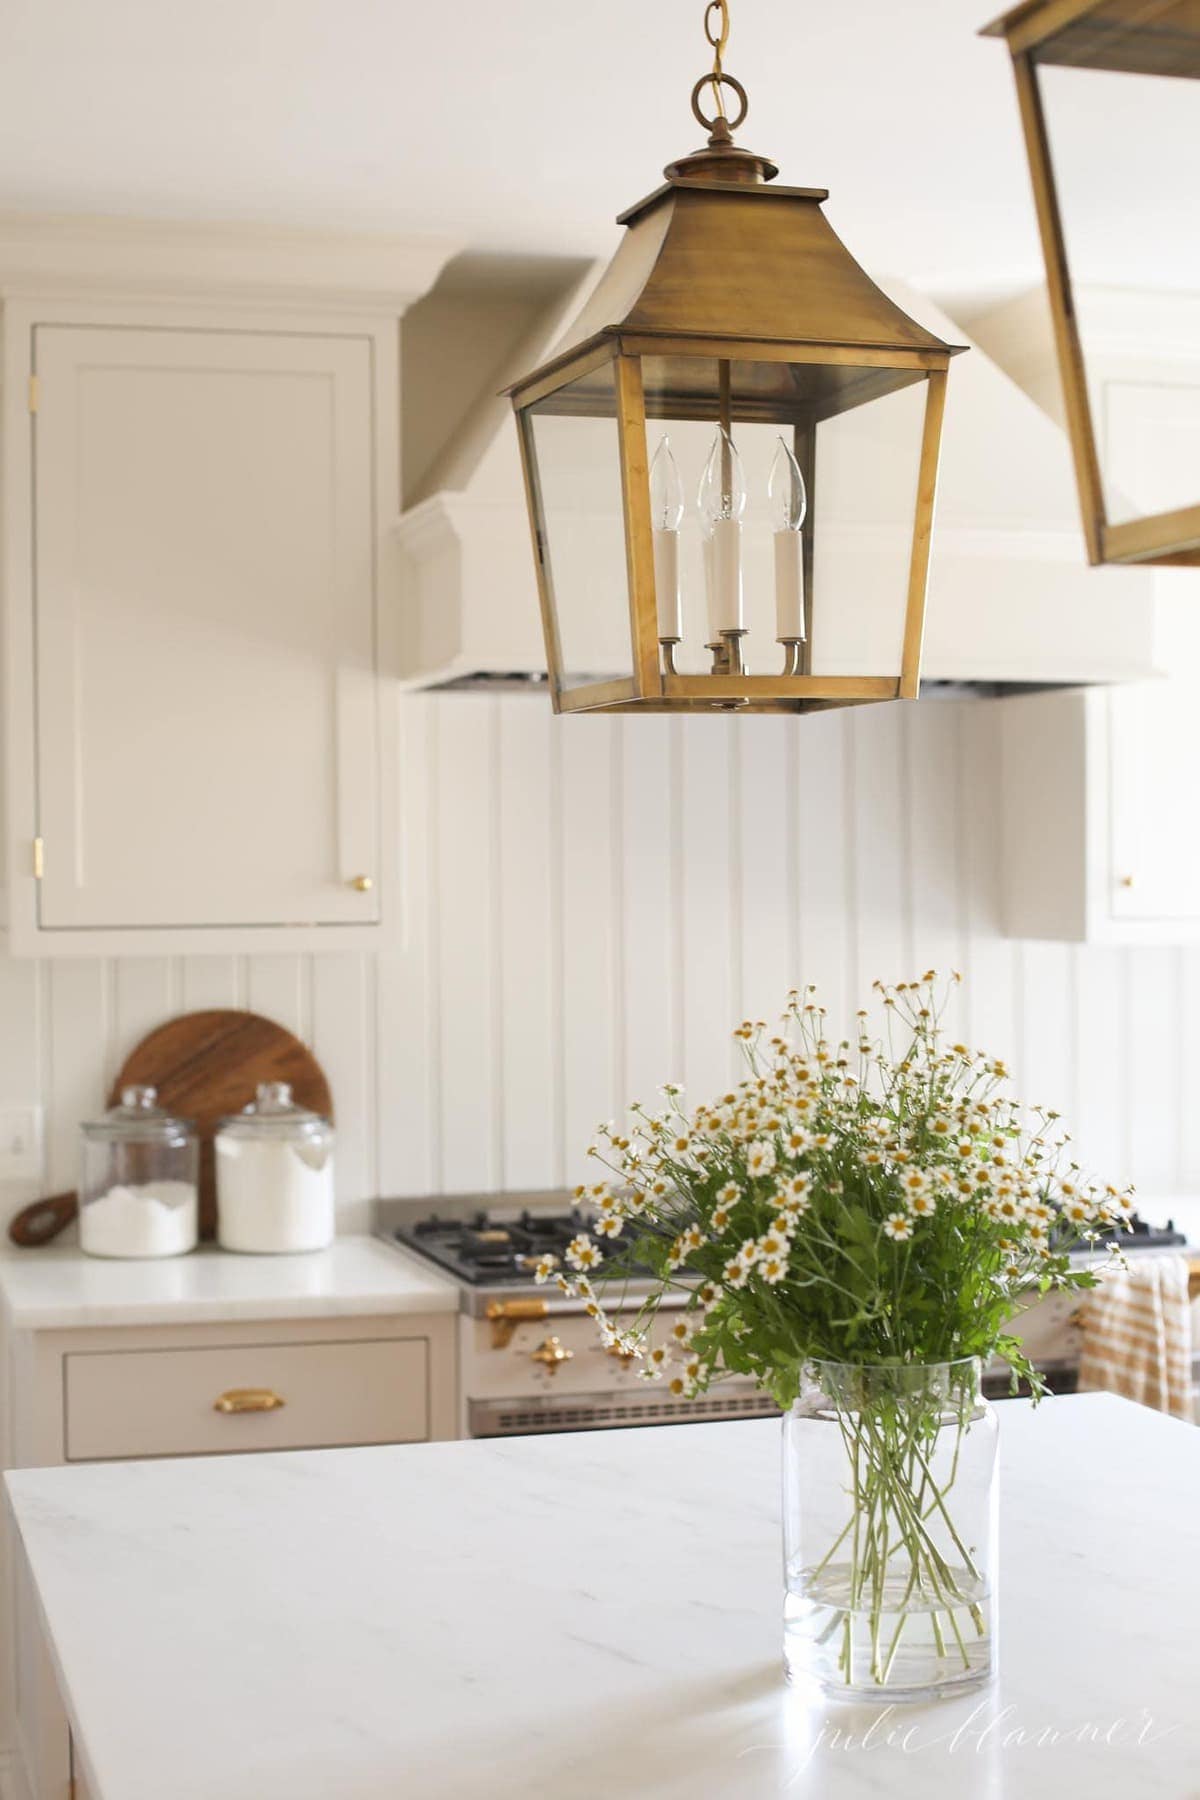 A cream kitchen with marble countertops and a vase of flowers on the island.